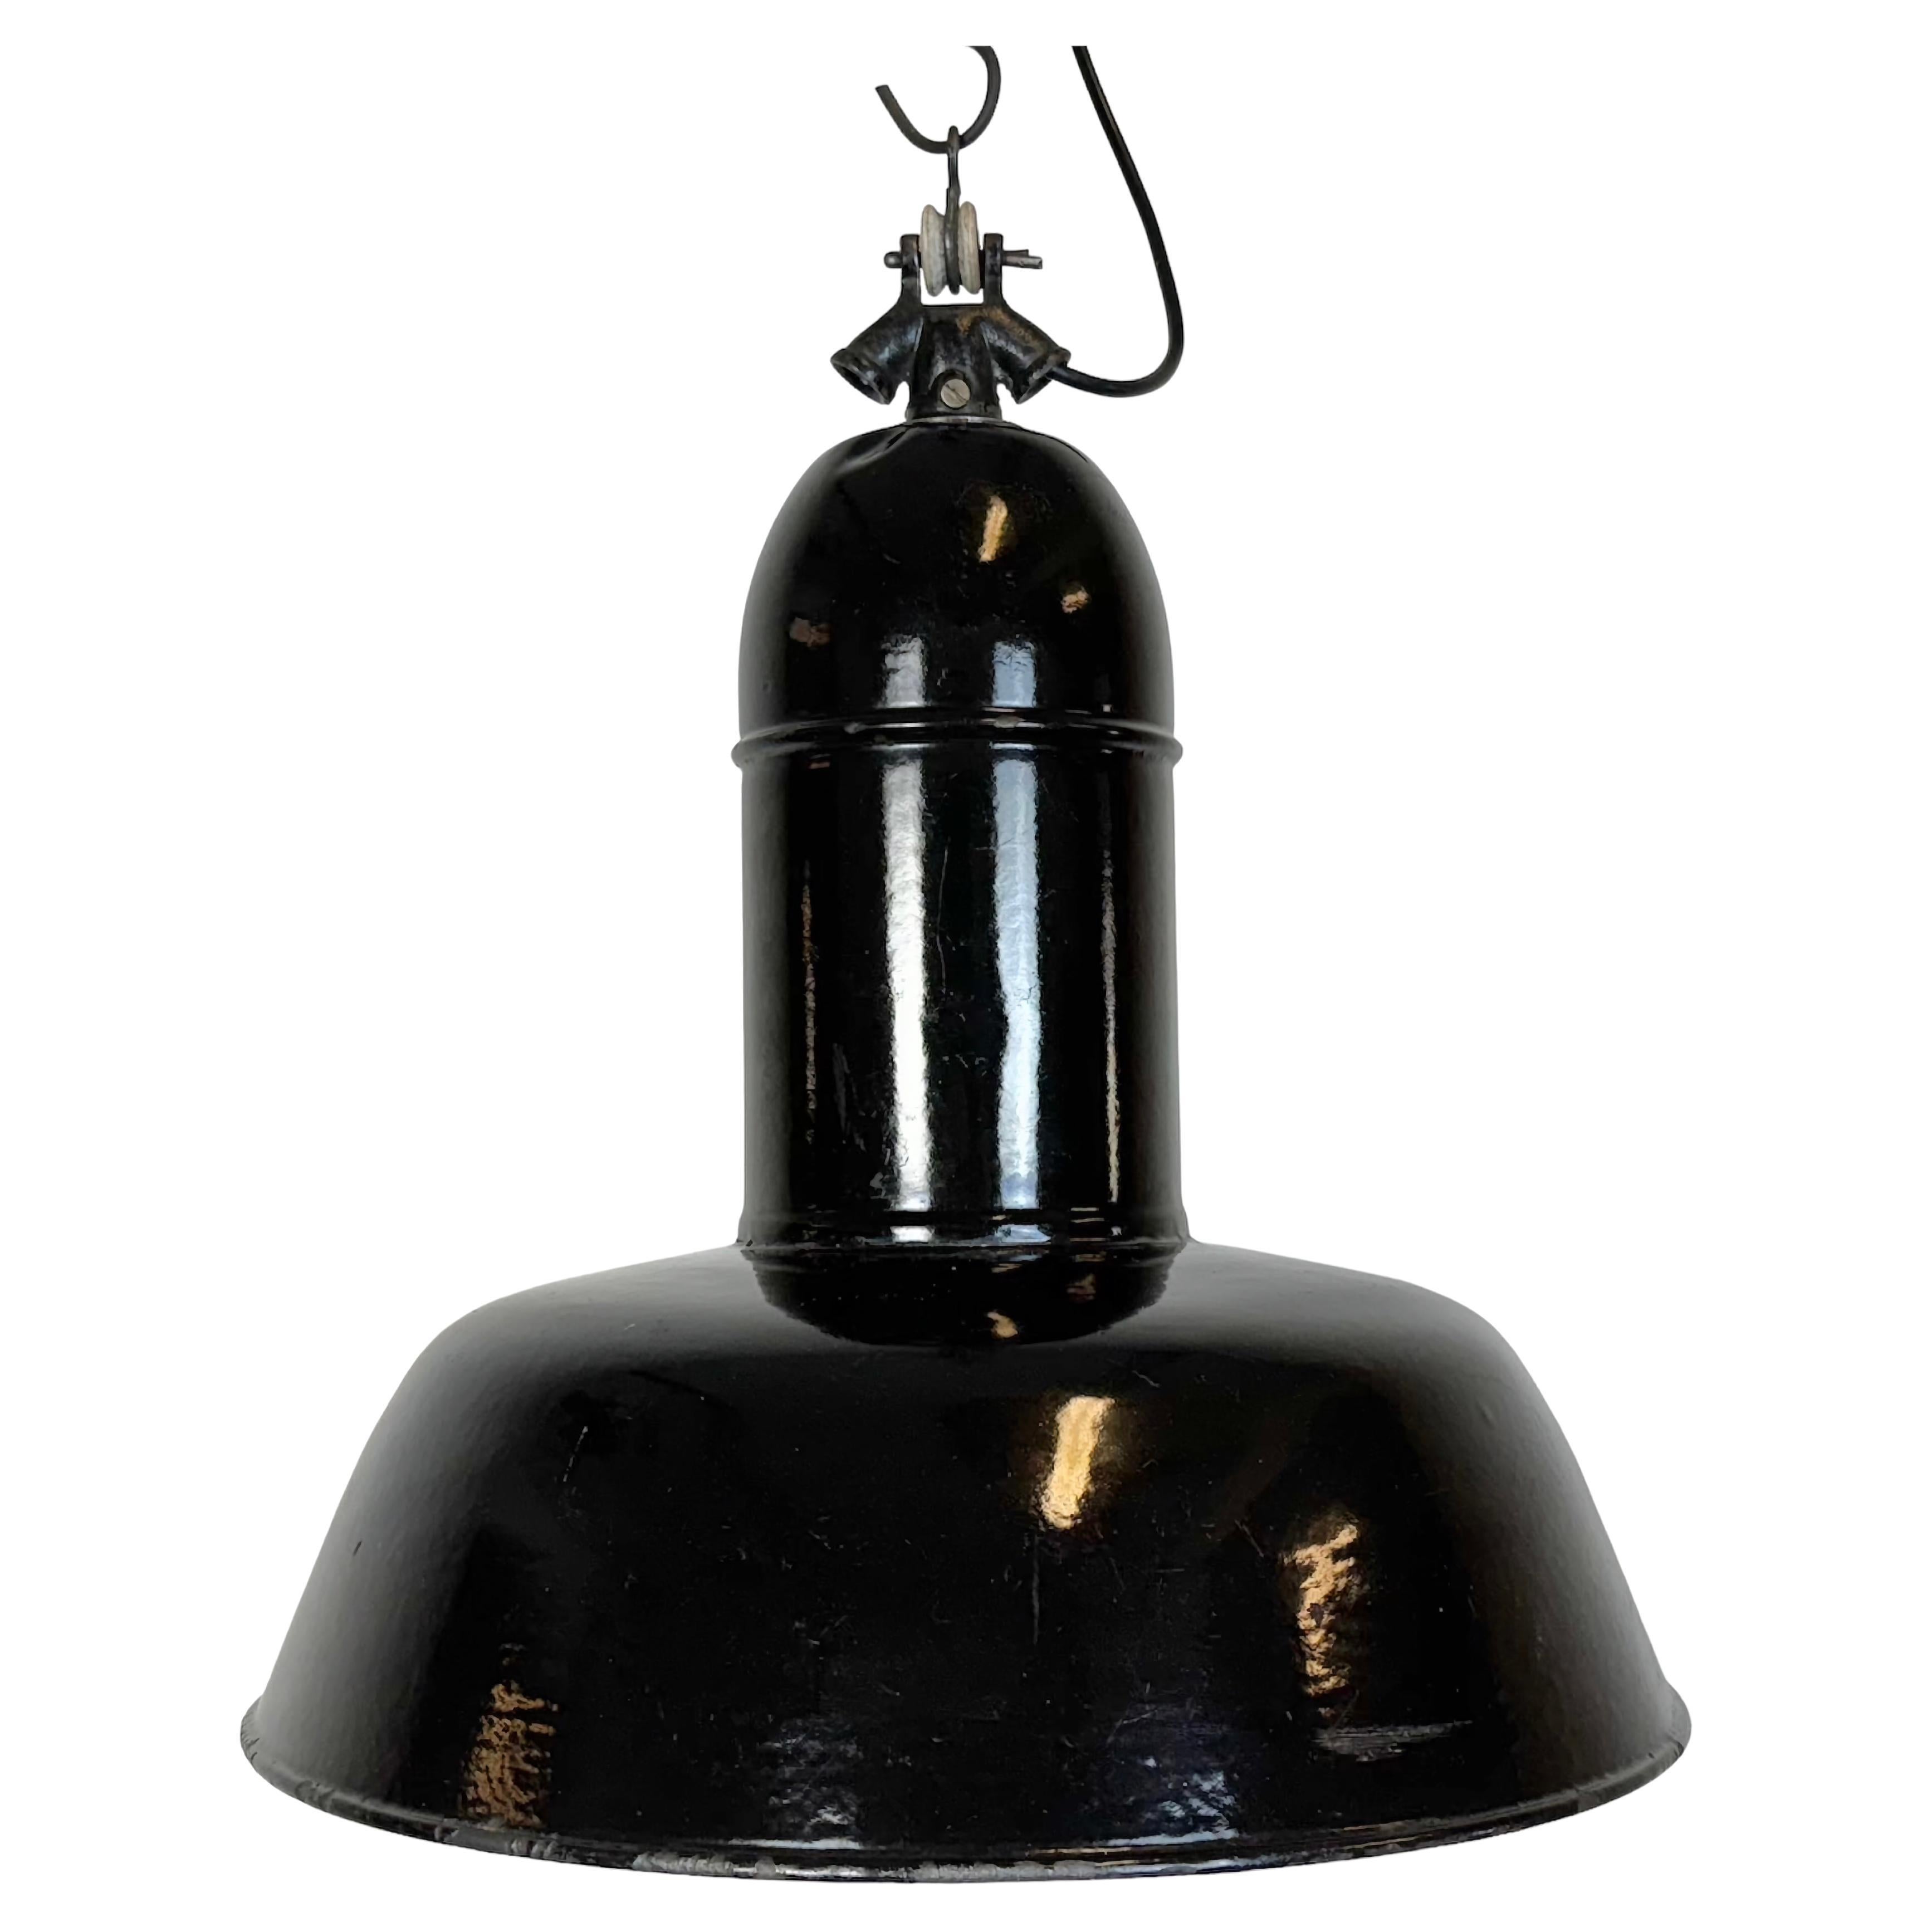 Industrial Black Enamel Factory Lamp with Cast Iron Top, 1930s